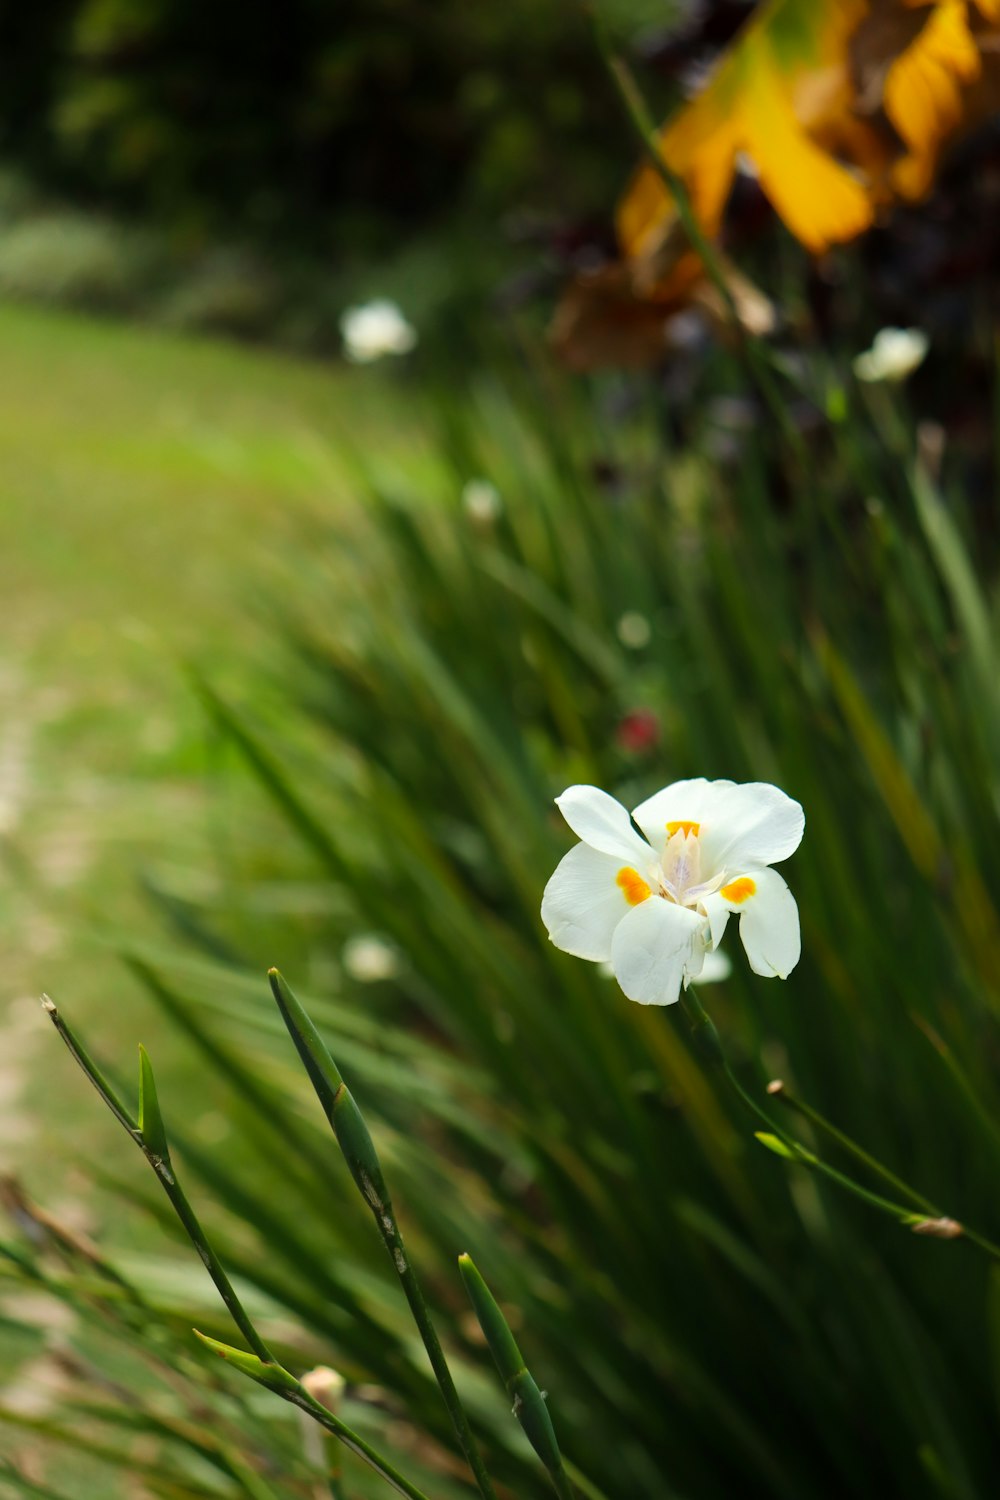 a single white flower in a grassy area